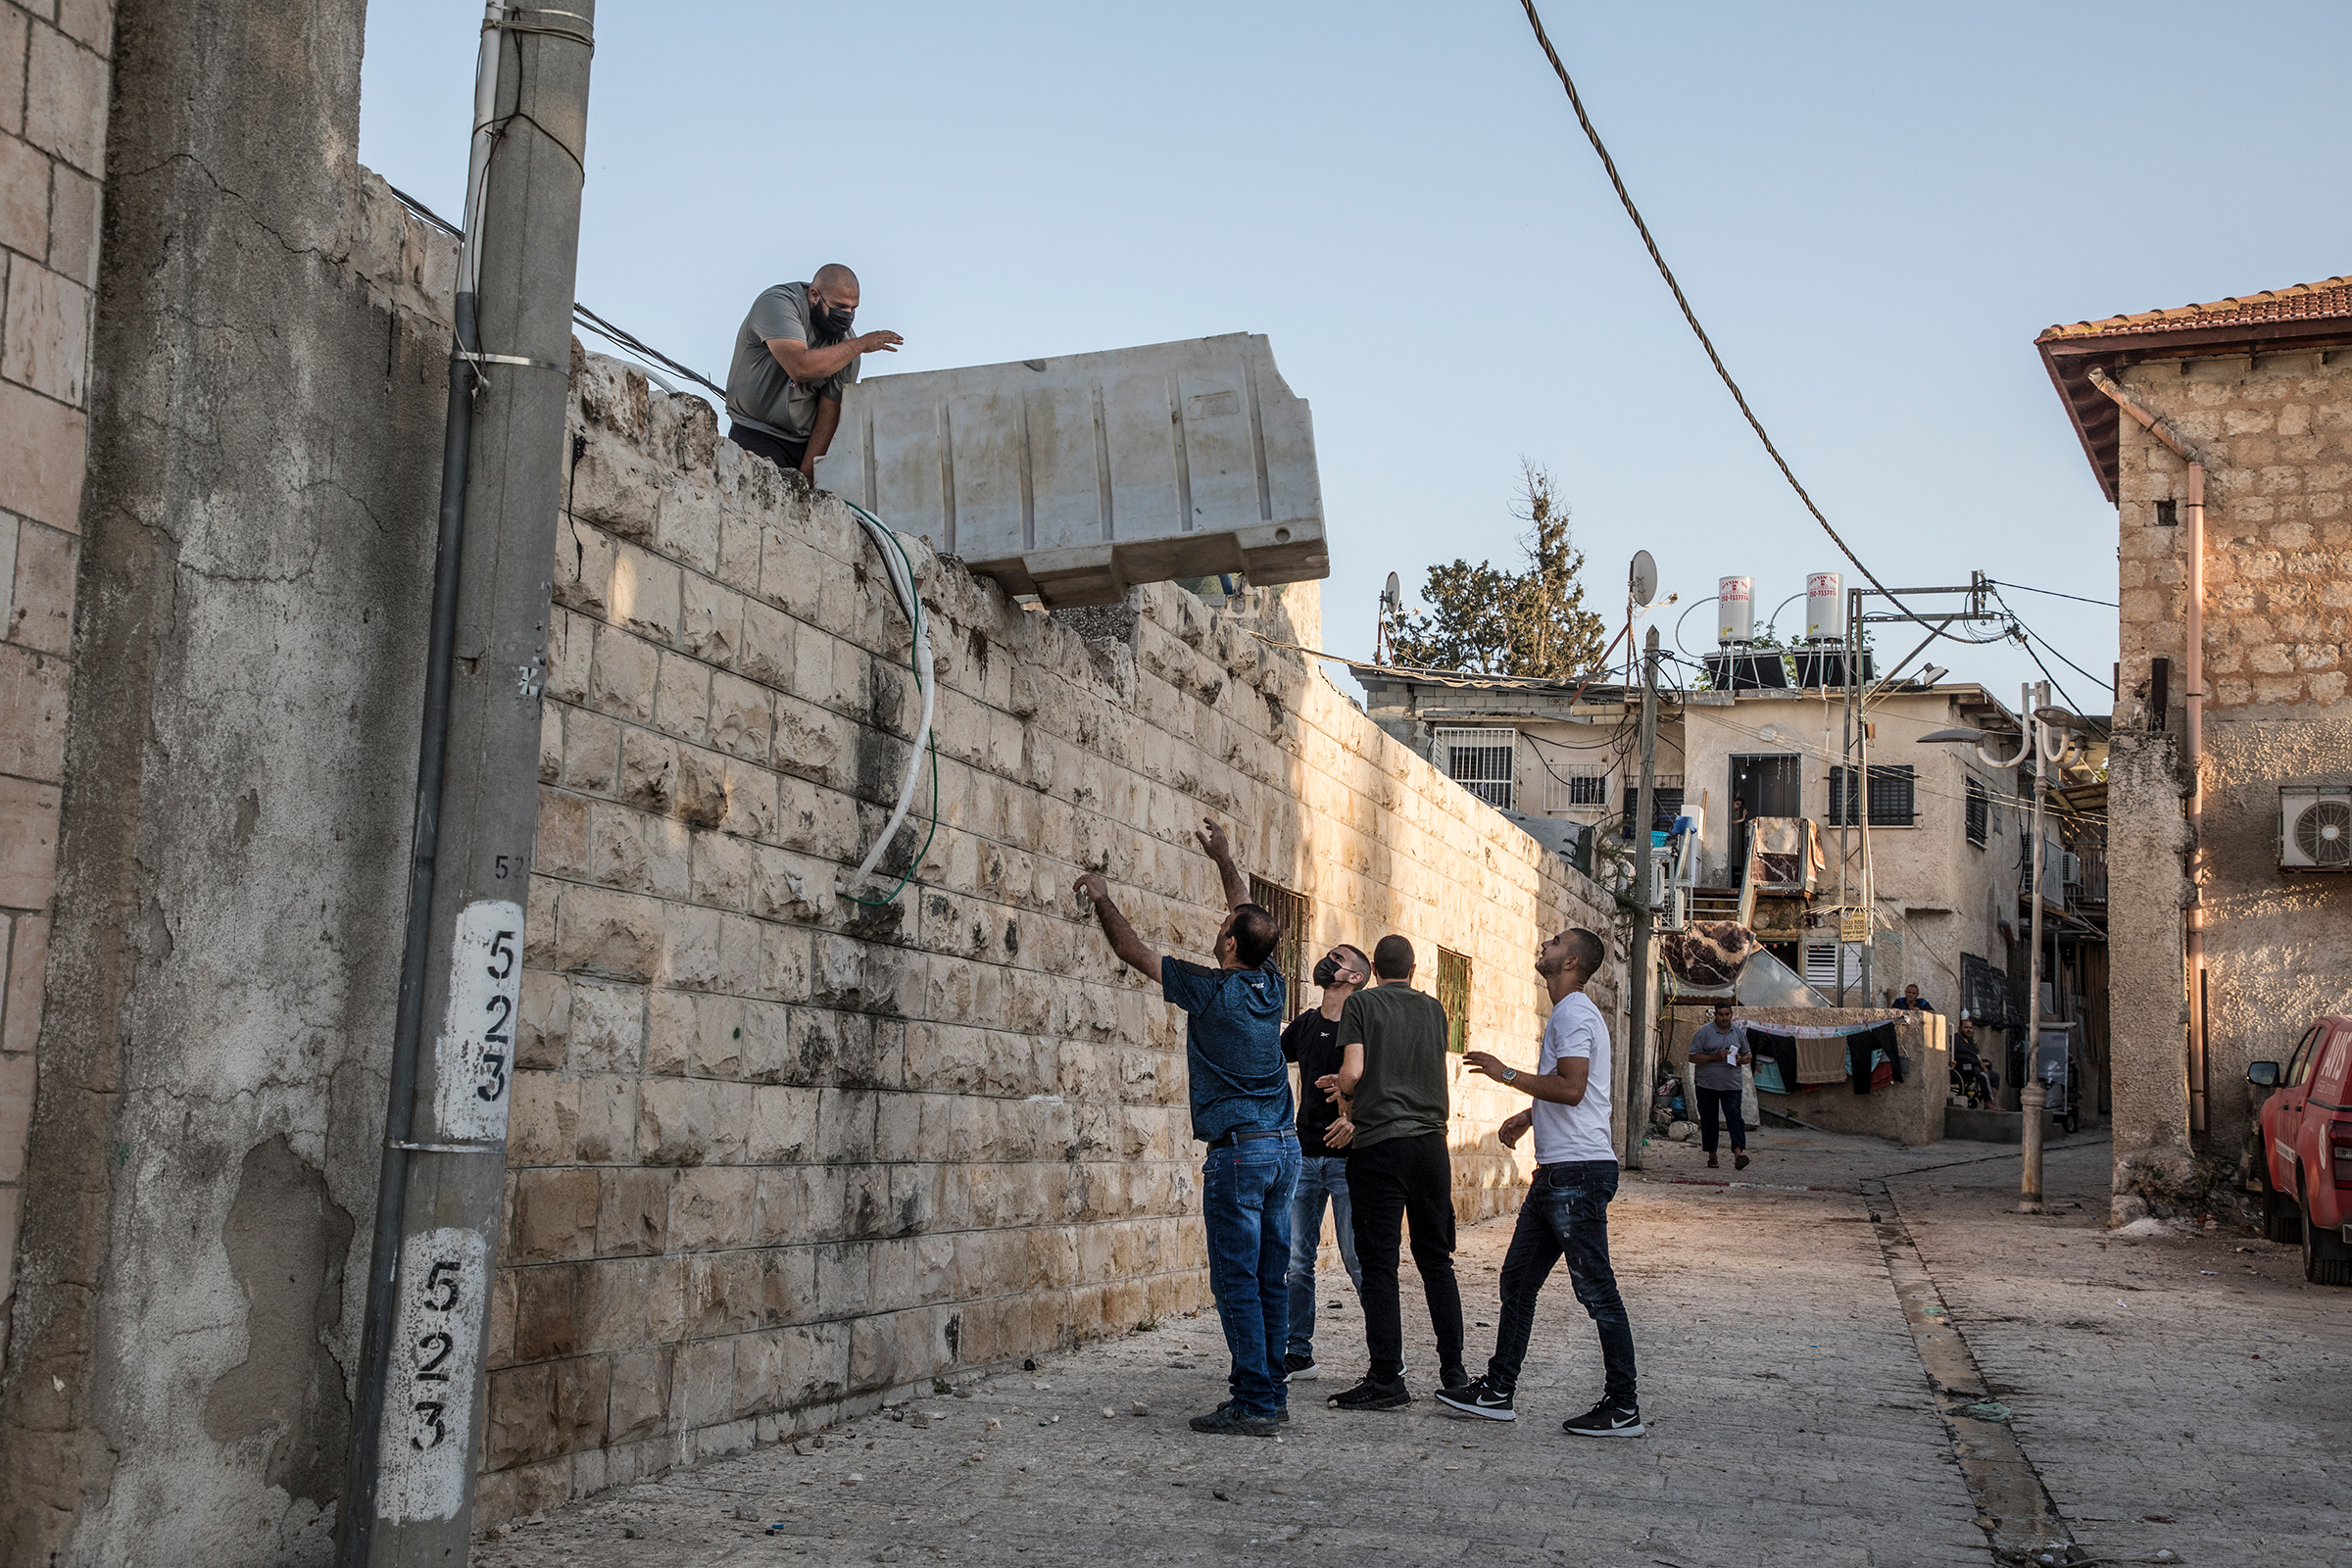 At the mosque in the old city center of Lod, young Palestinians gather on the roof to prepare their defense before expected clashes on May 12, 2021. (Laurent Van Der Stockt—Getty Images)